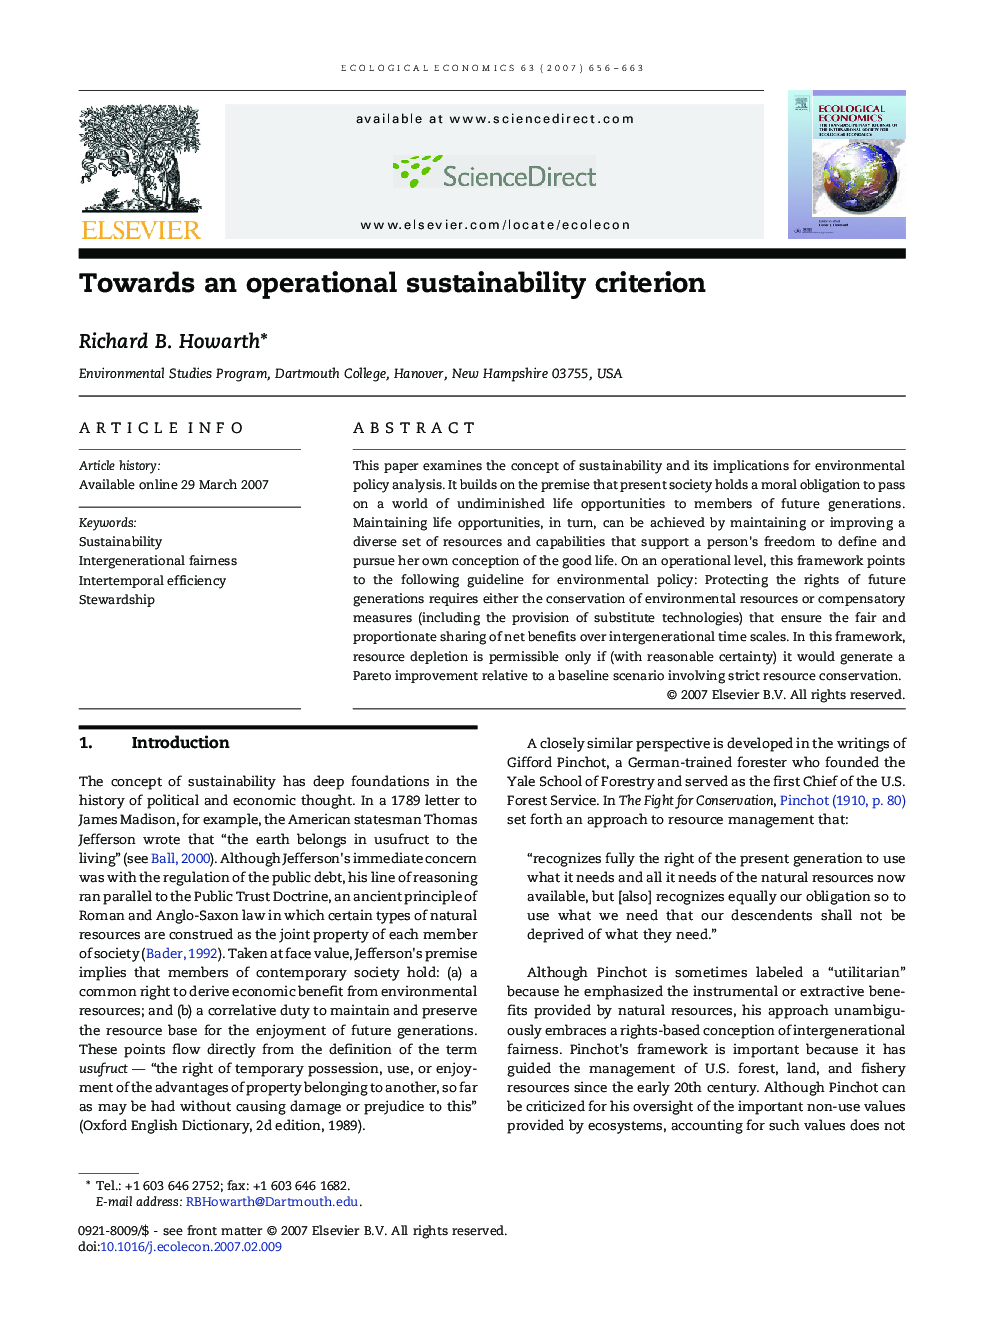 Towards an operational sustainability criterion